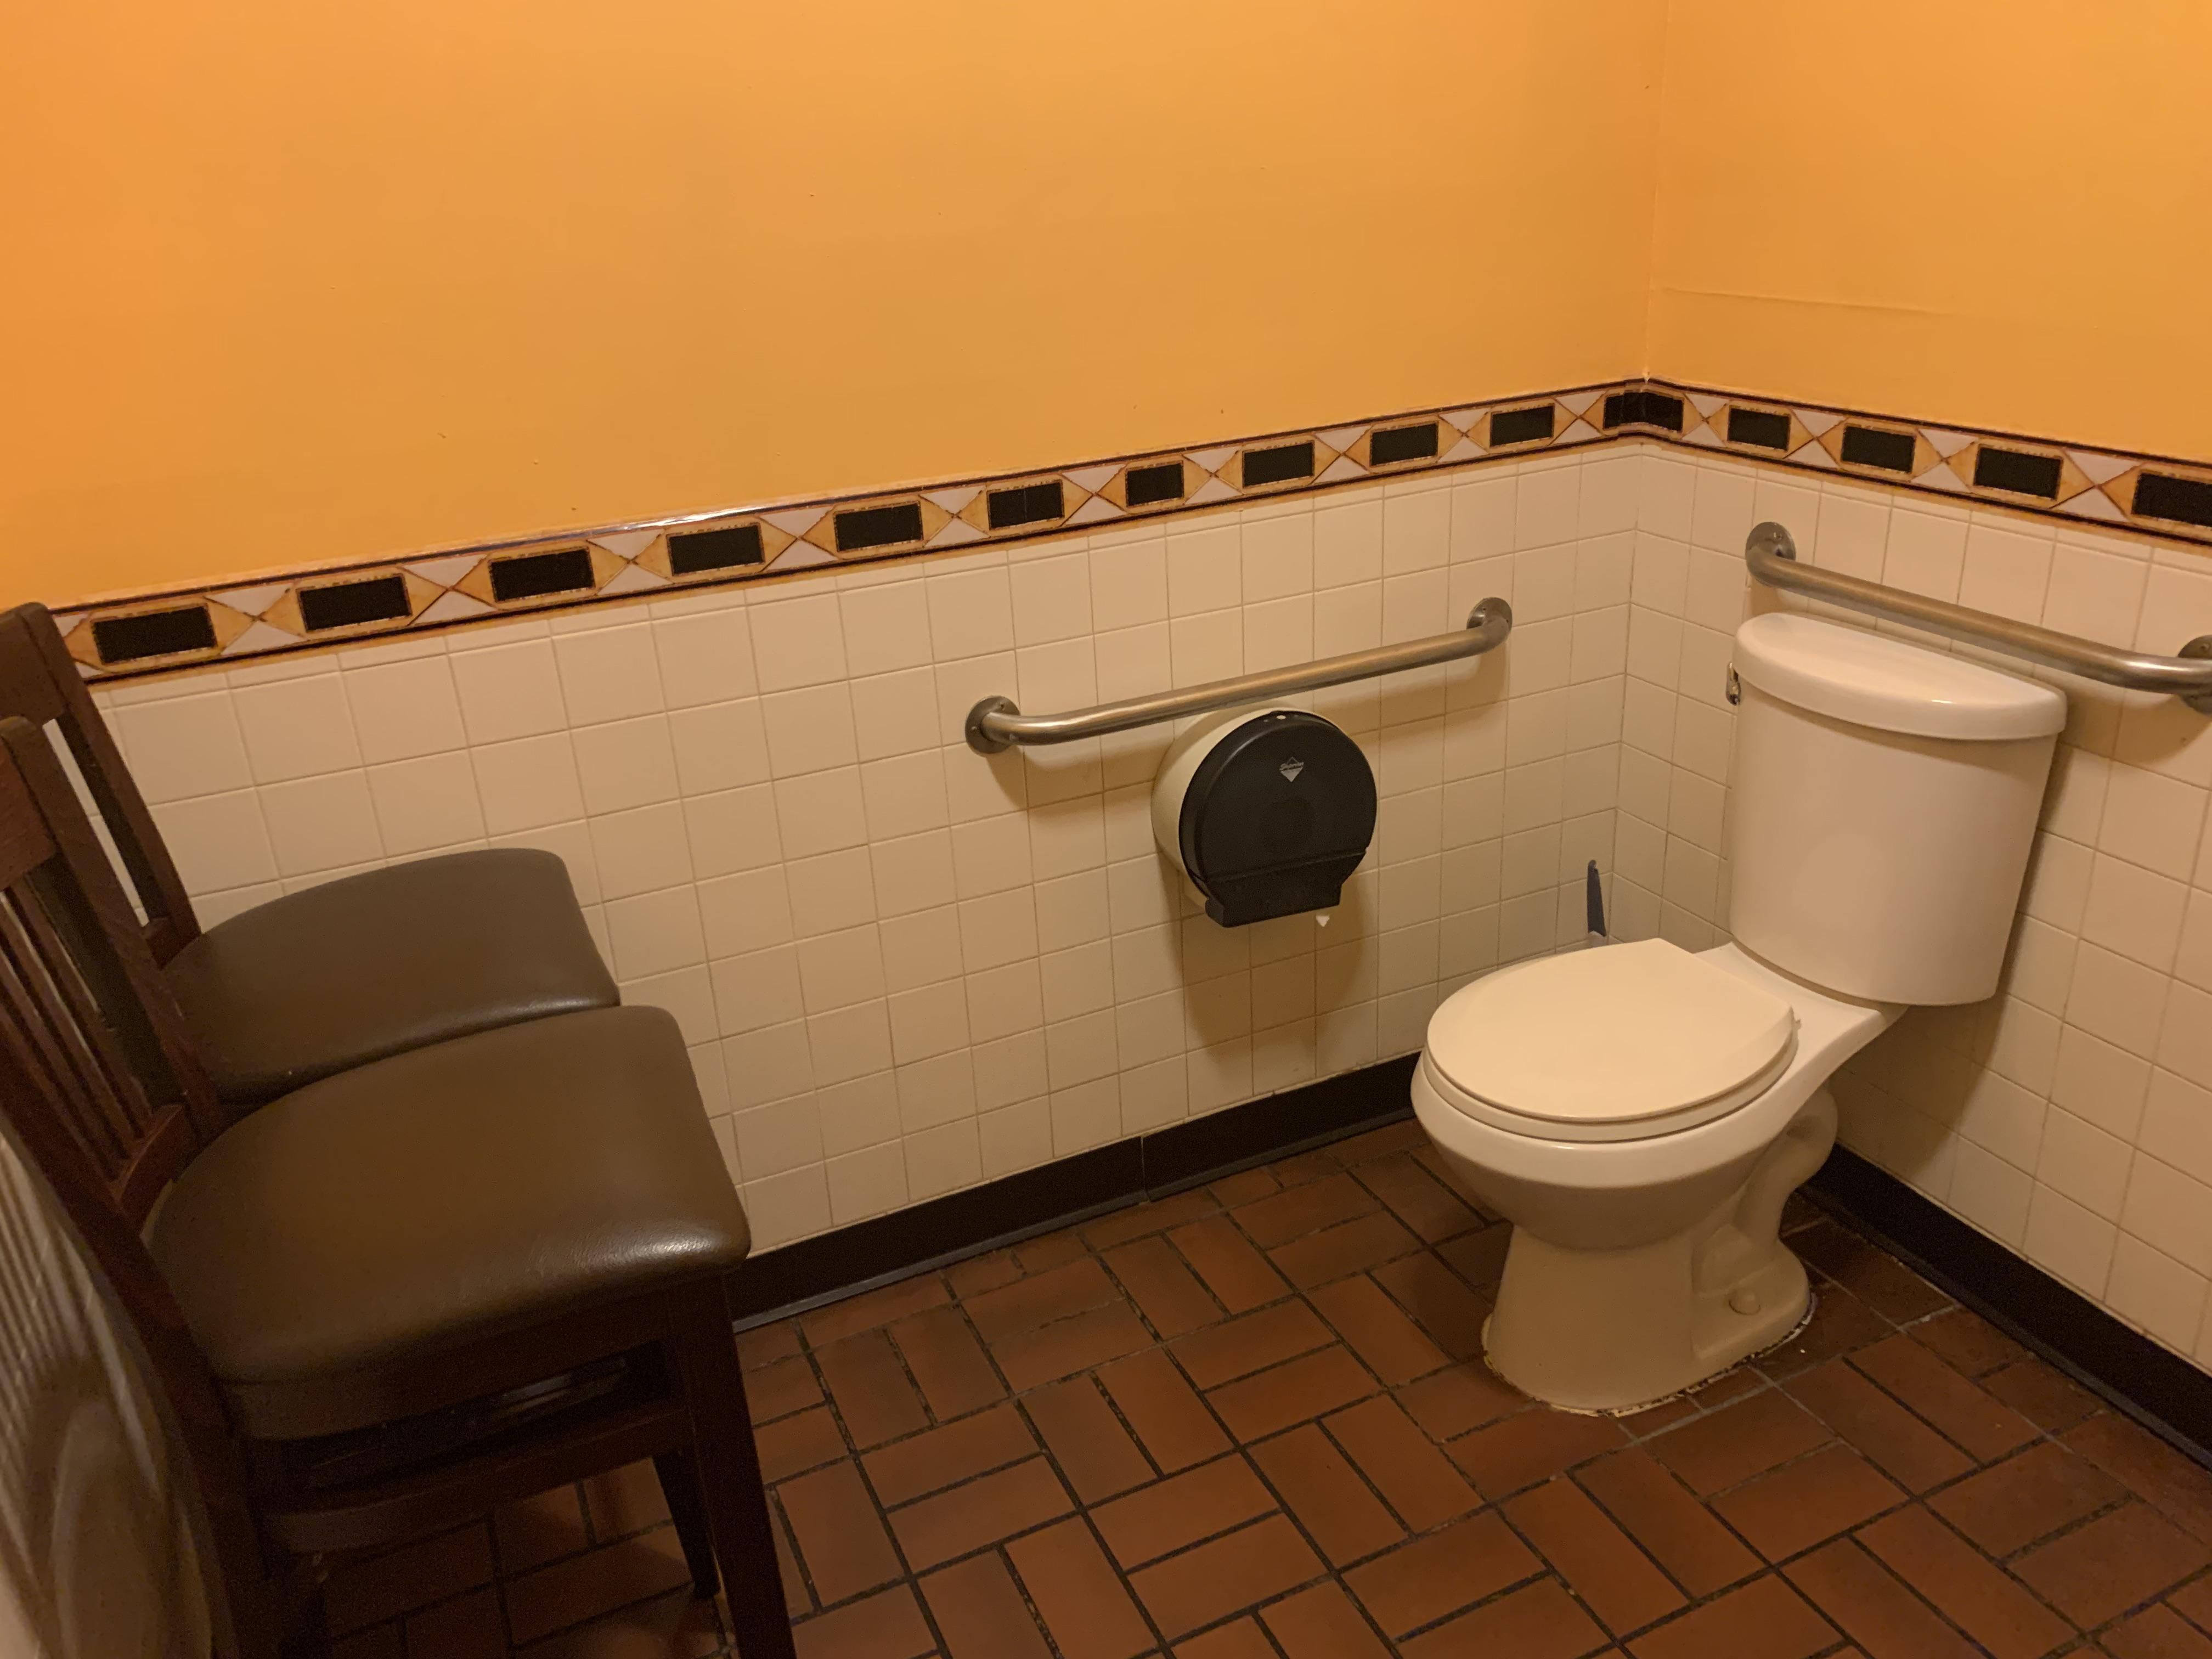 Not sure why this Chinese restaurant has chairs in front of the toilet but my interest is now peaked.